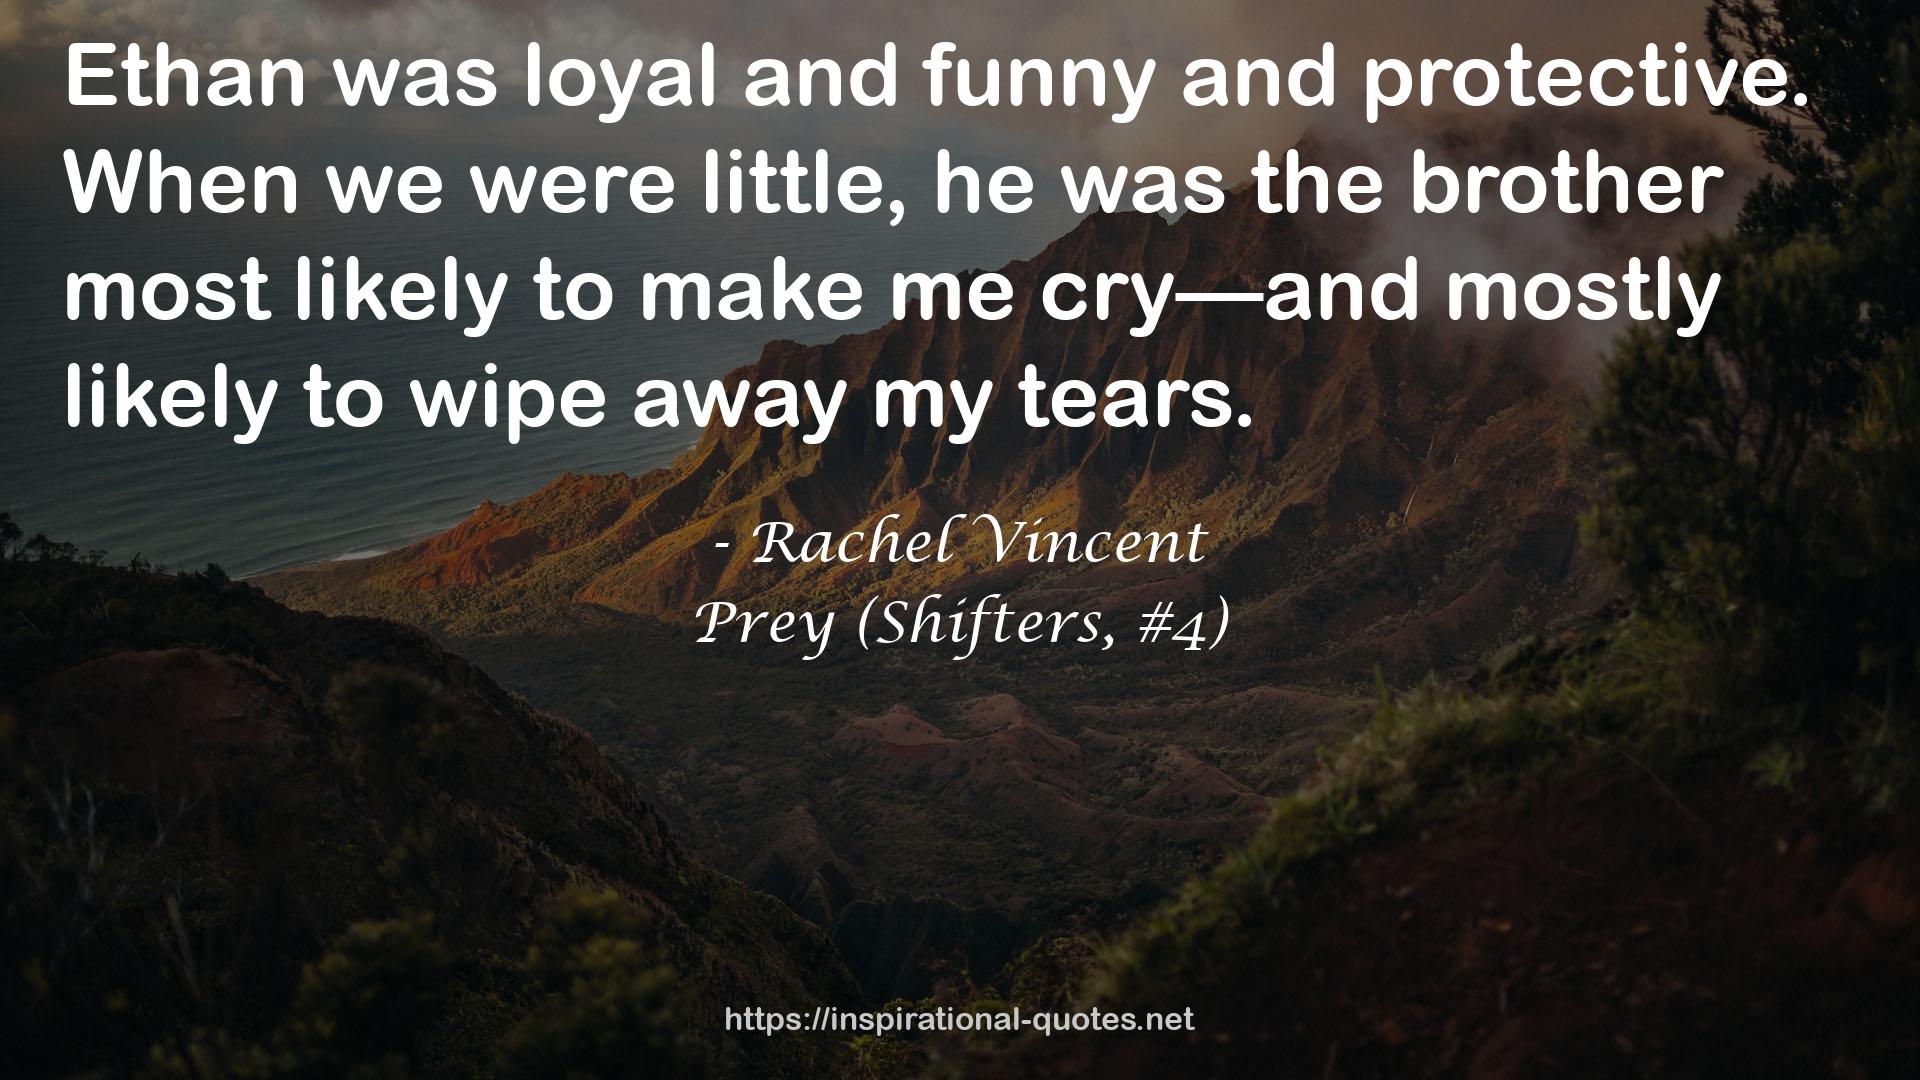 Prey (Shifters, #4) QUOTES